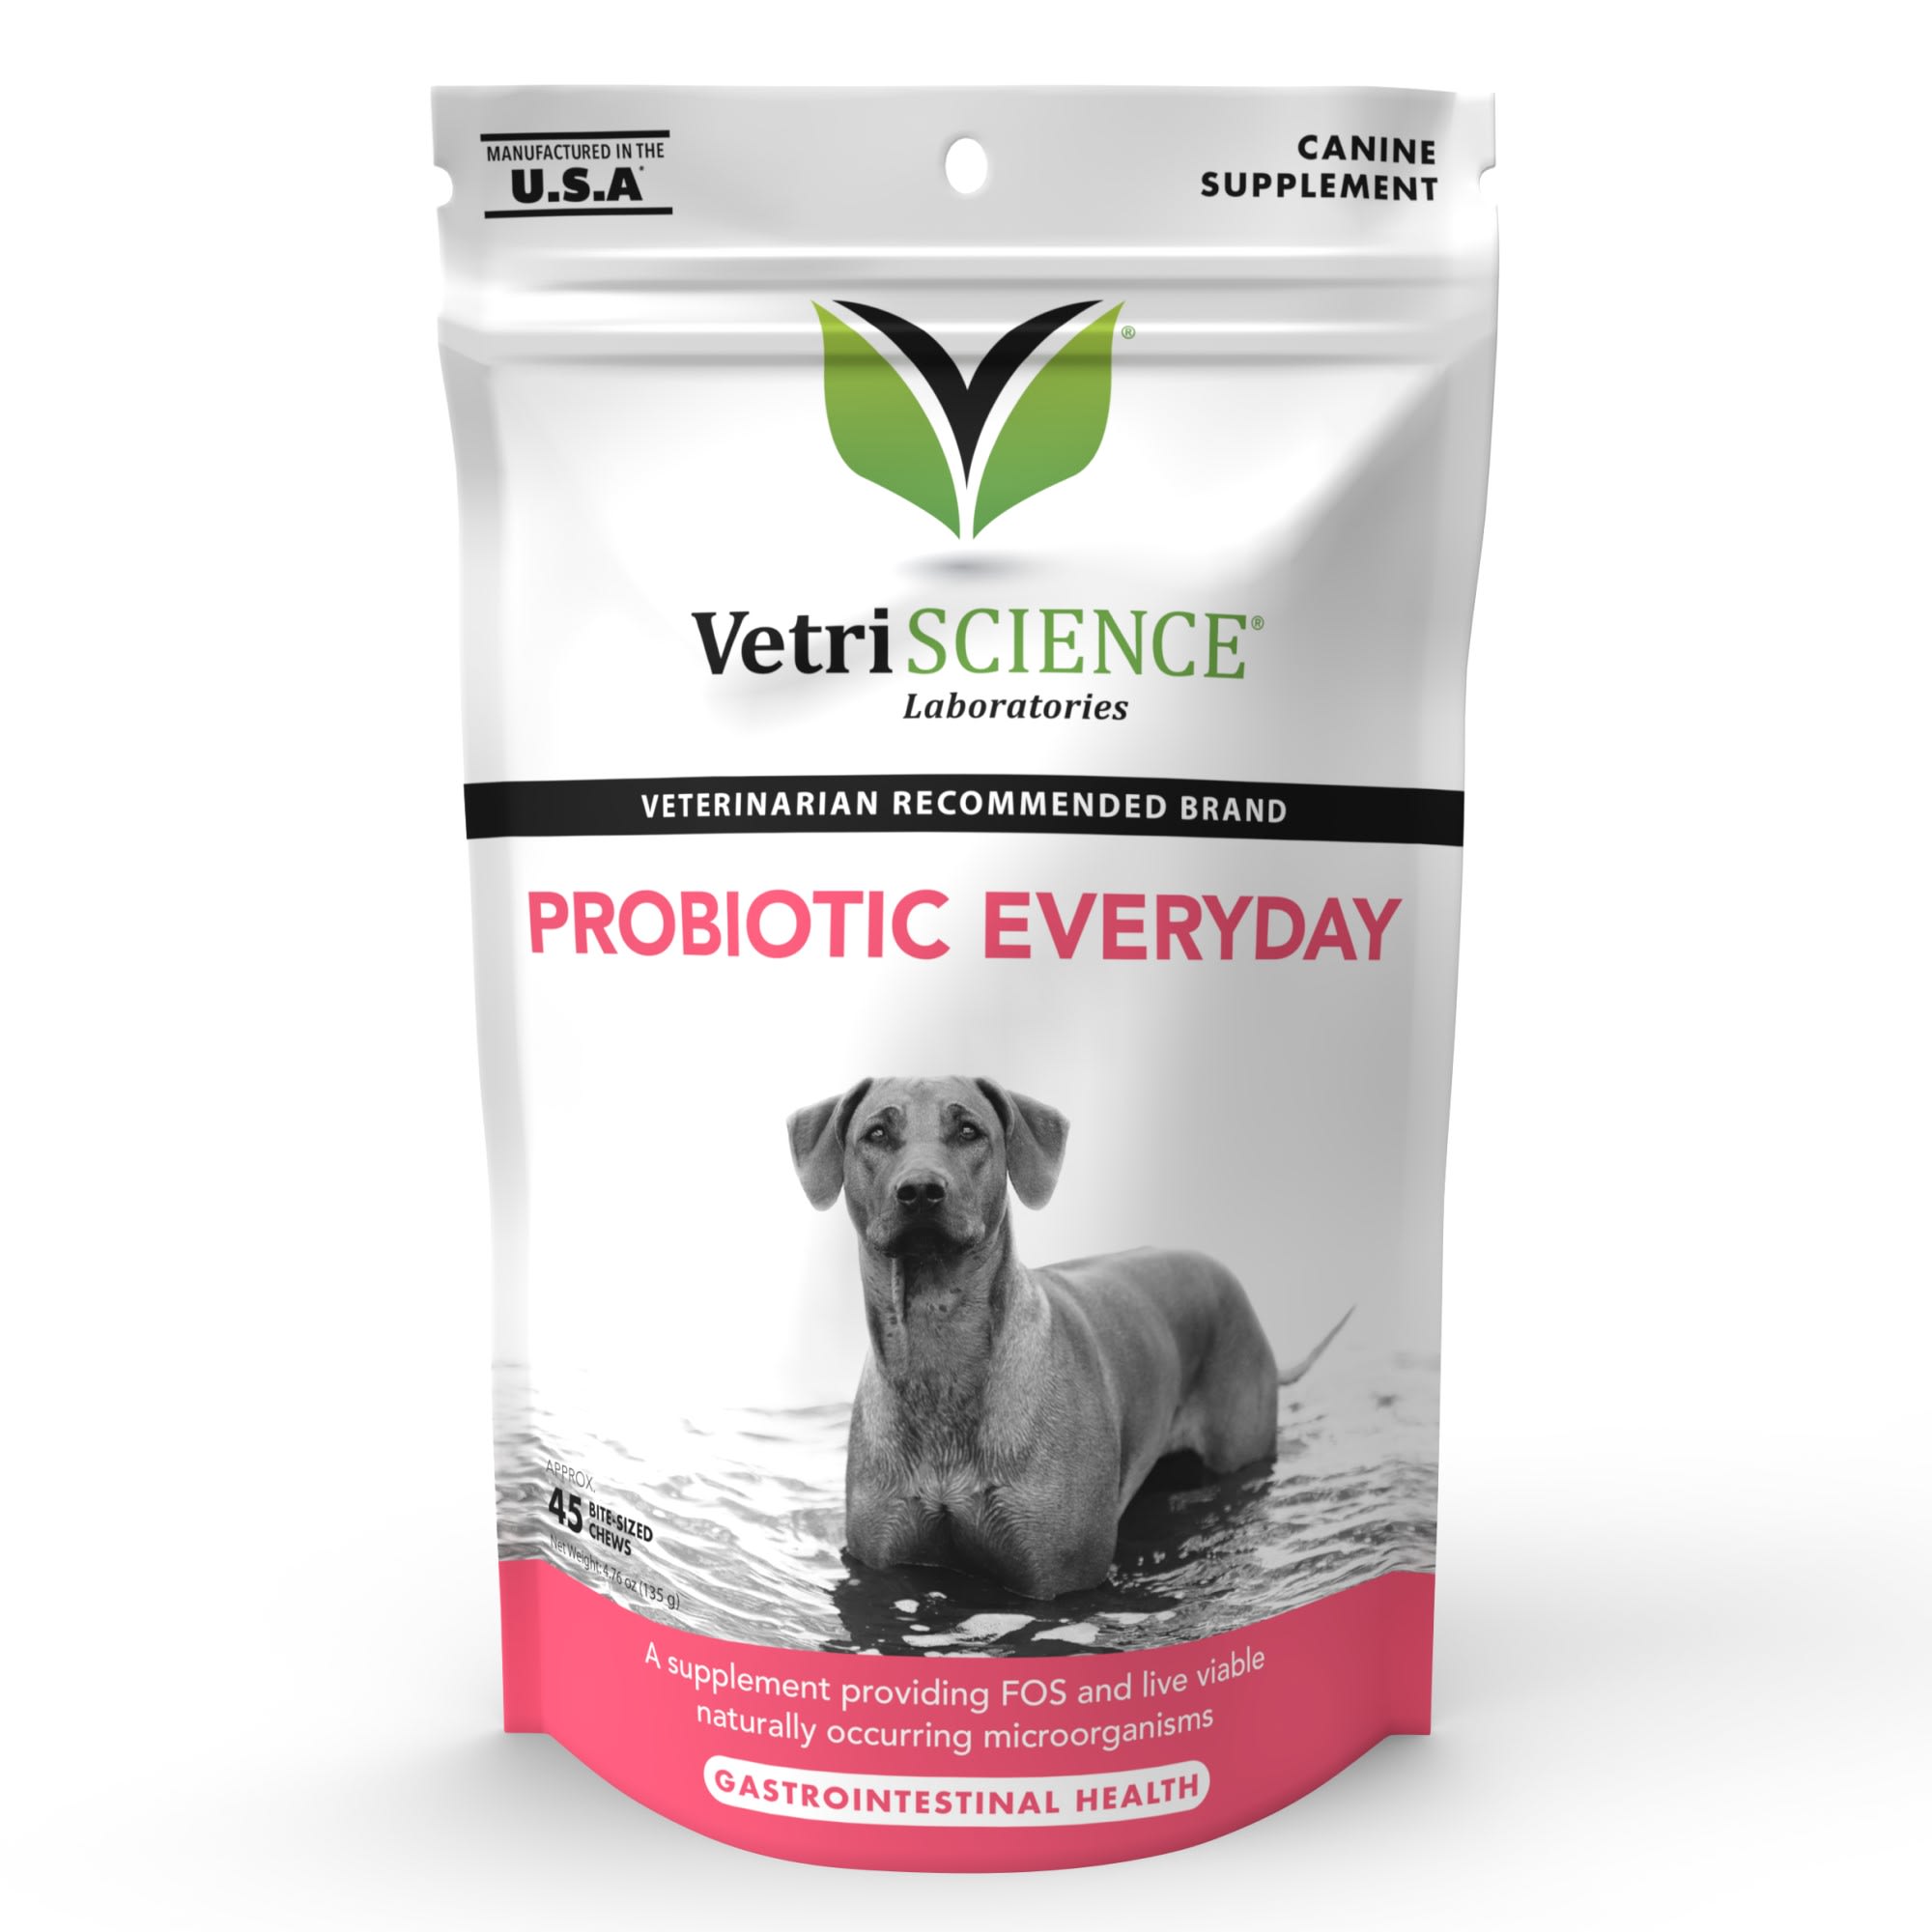  Purina Pro Plan Veterinary Supplements FortiFlora Dog  Probiotic Supplement, Canine Nutritional Supplement - (72) 30 ct. Boxes :  Pet Probiotic Nutritional Supplements : Pet Supplies